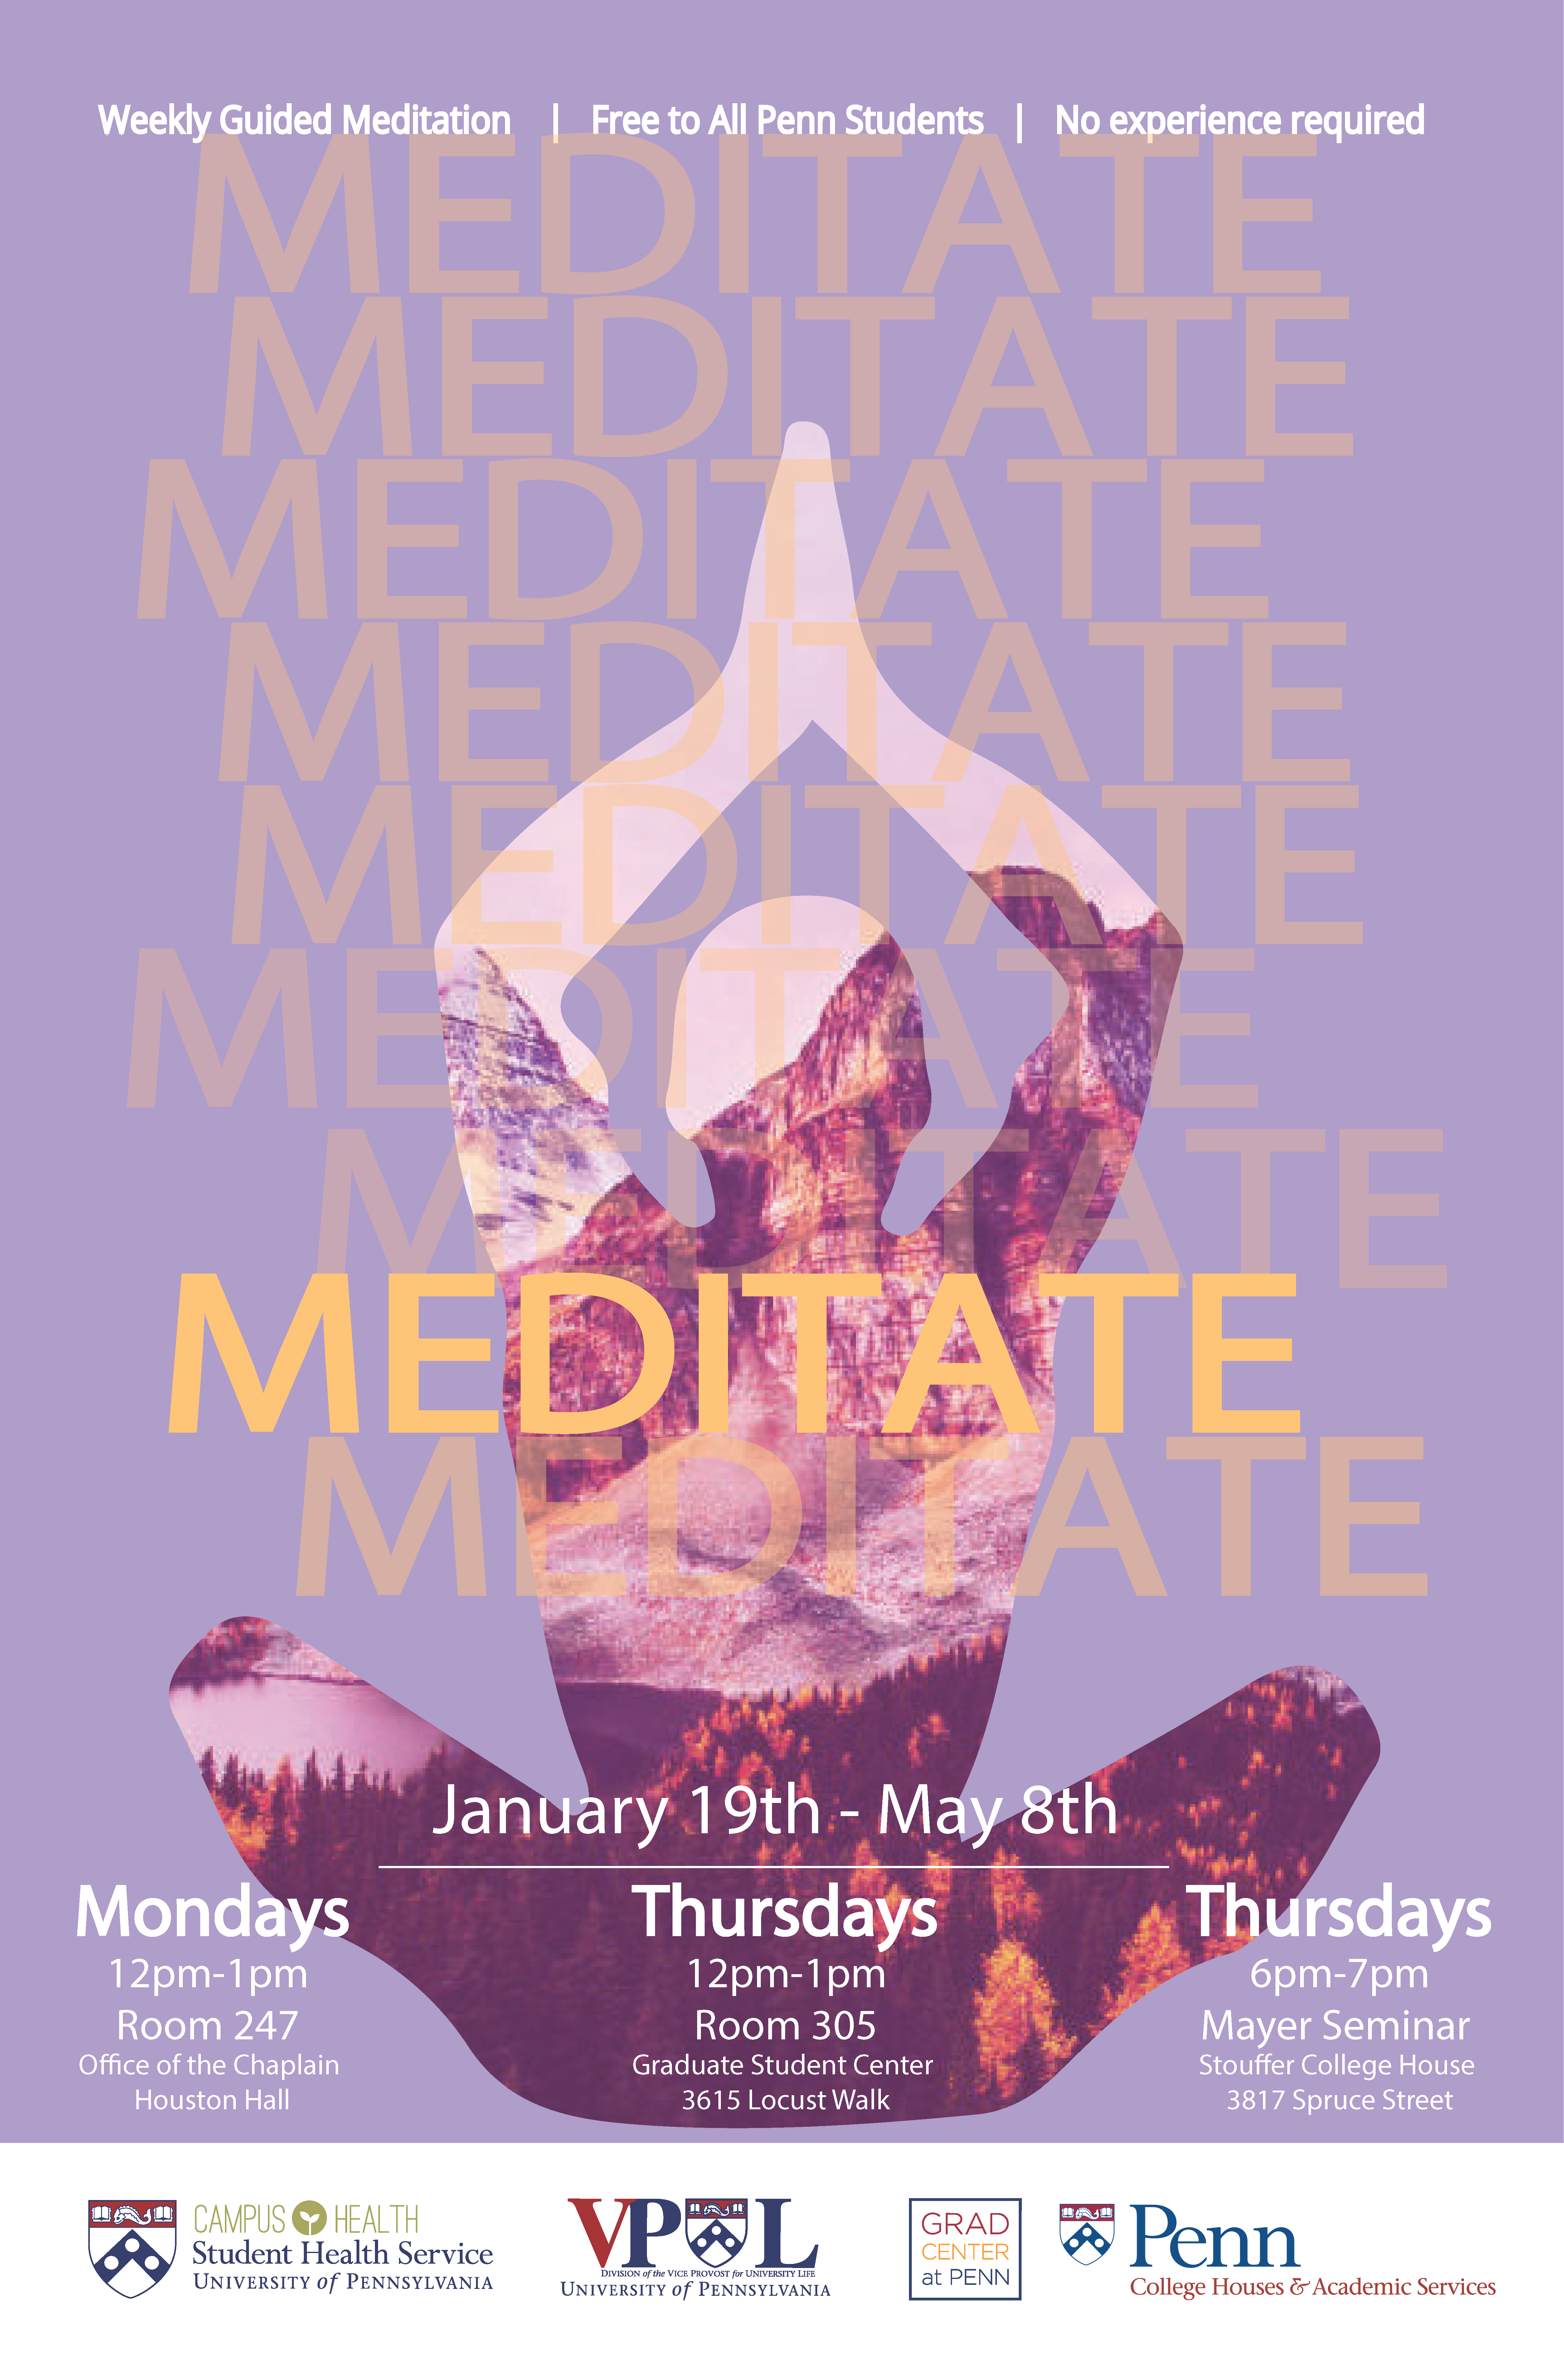 Meditation poster from Campus Health